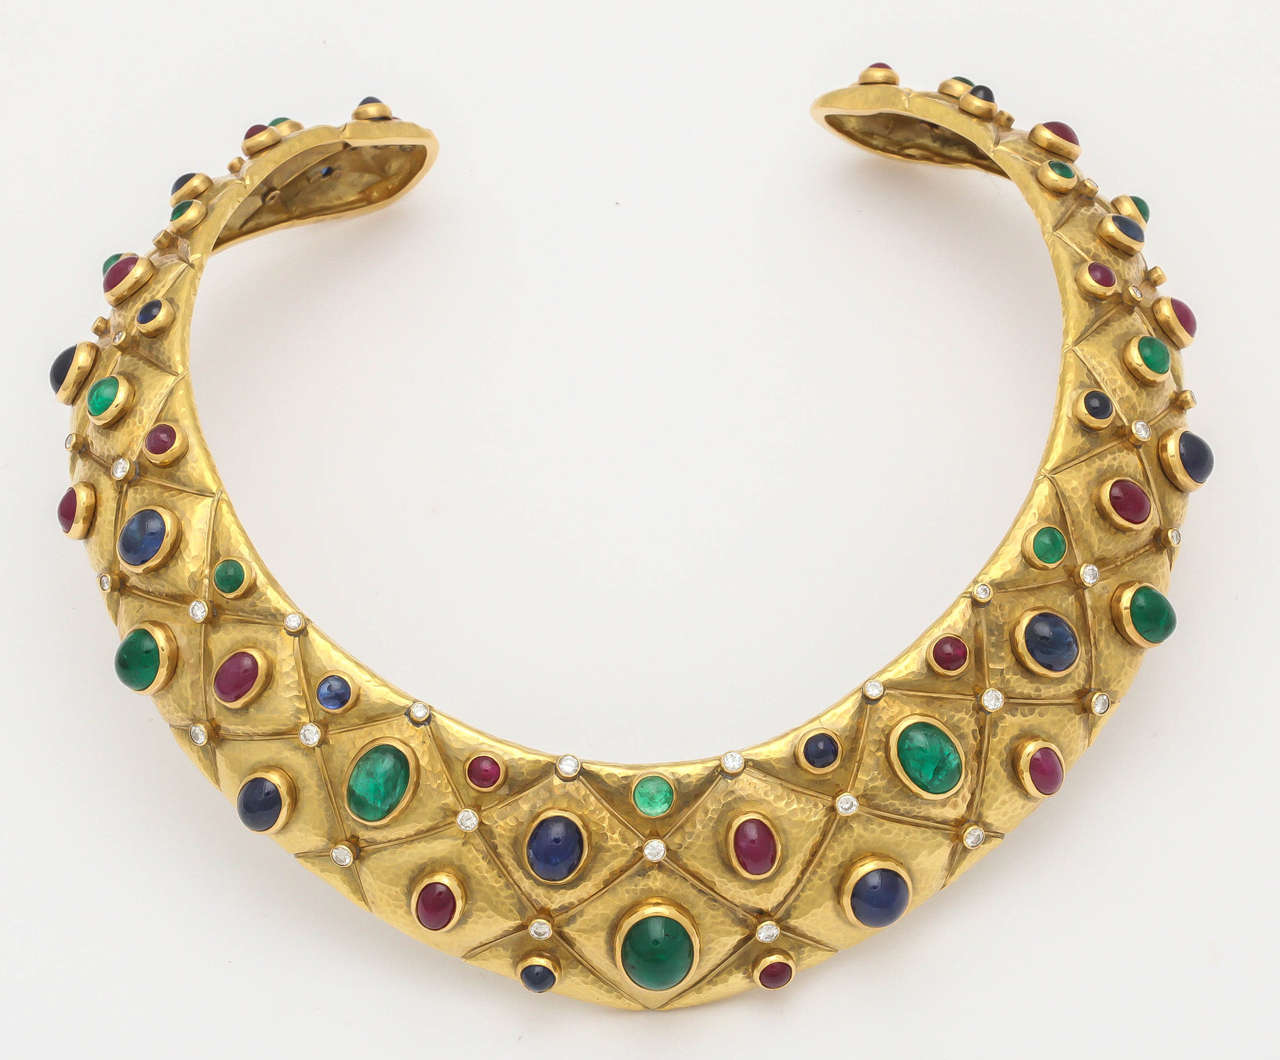 The open hammered Gold choker is encrusted with oval and circular cabochon rubies, emeralds, sapphires and brilliant-cut diamonds.diamonds weighing 1.85ct, rubies weighing15.95ct, sapphires weighing 24.10emeralds weighing 18.75ct.